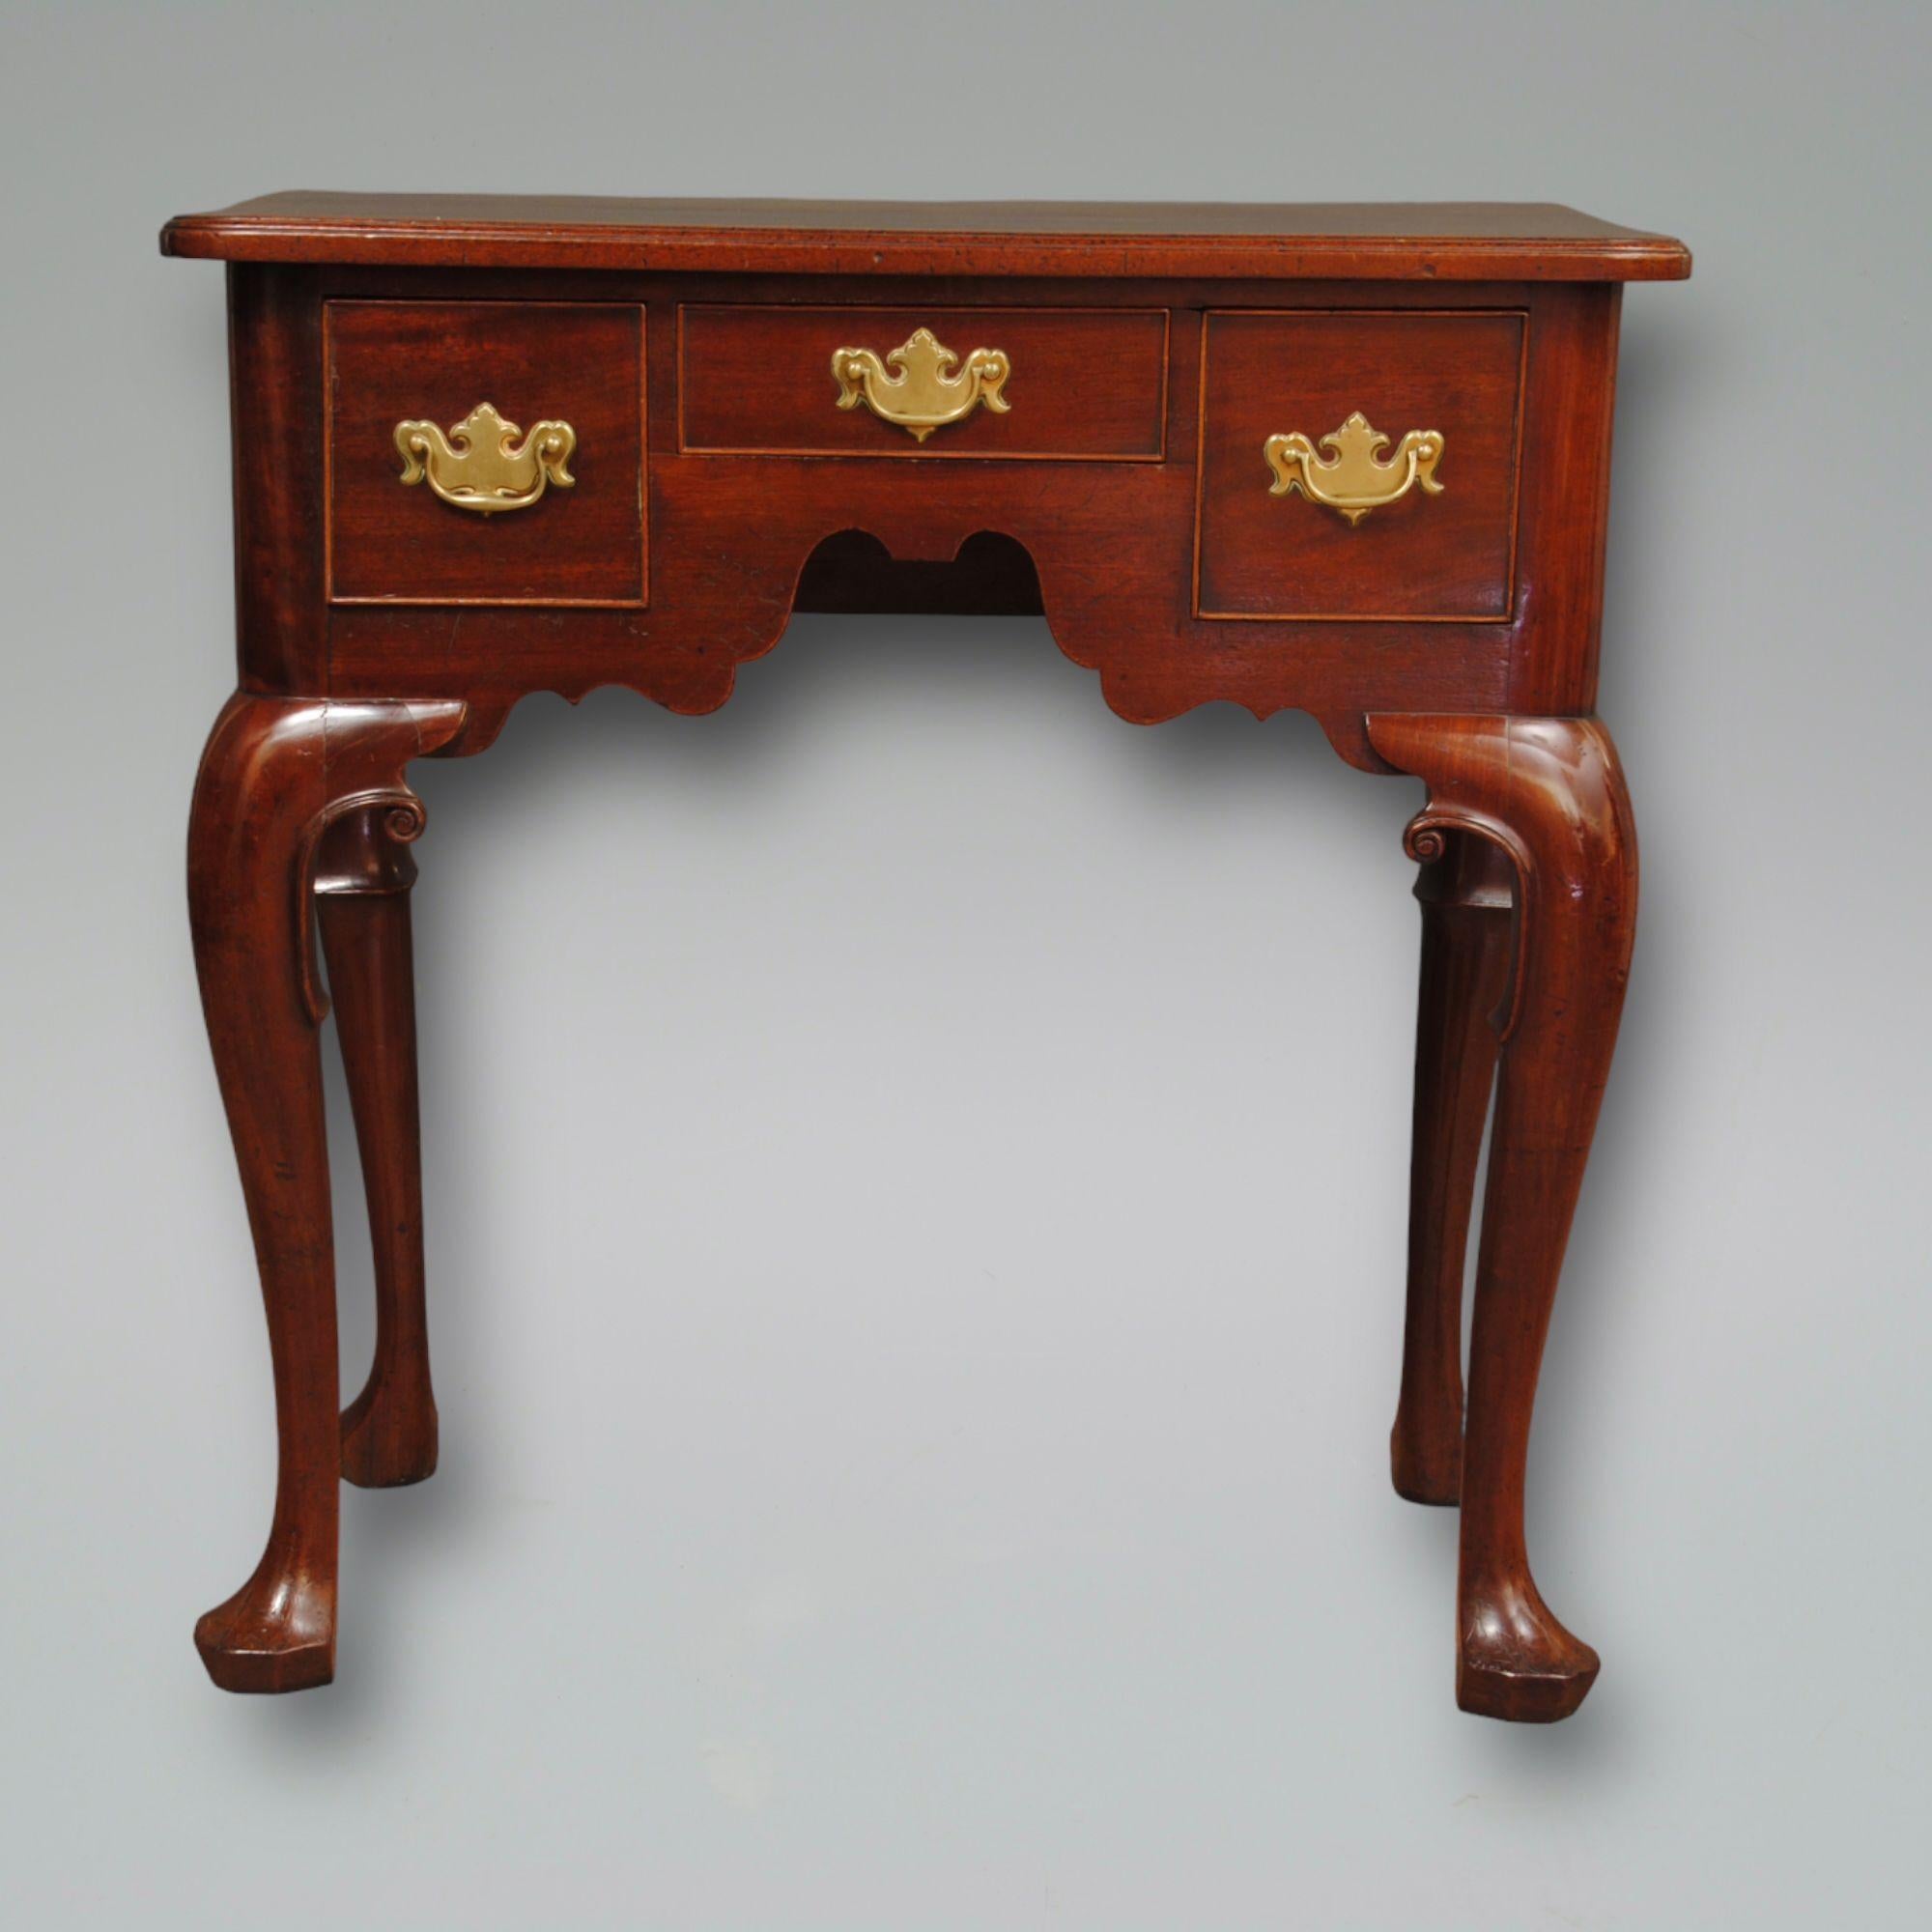 A lovely example of a Georgian mahogany lowboy with cabriole legs and carved scolls, original handles and great colour and patination.
       